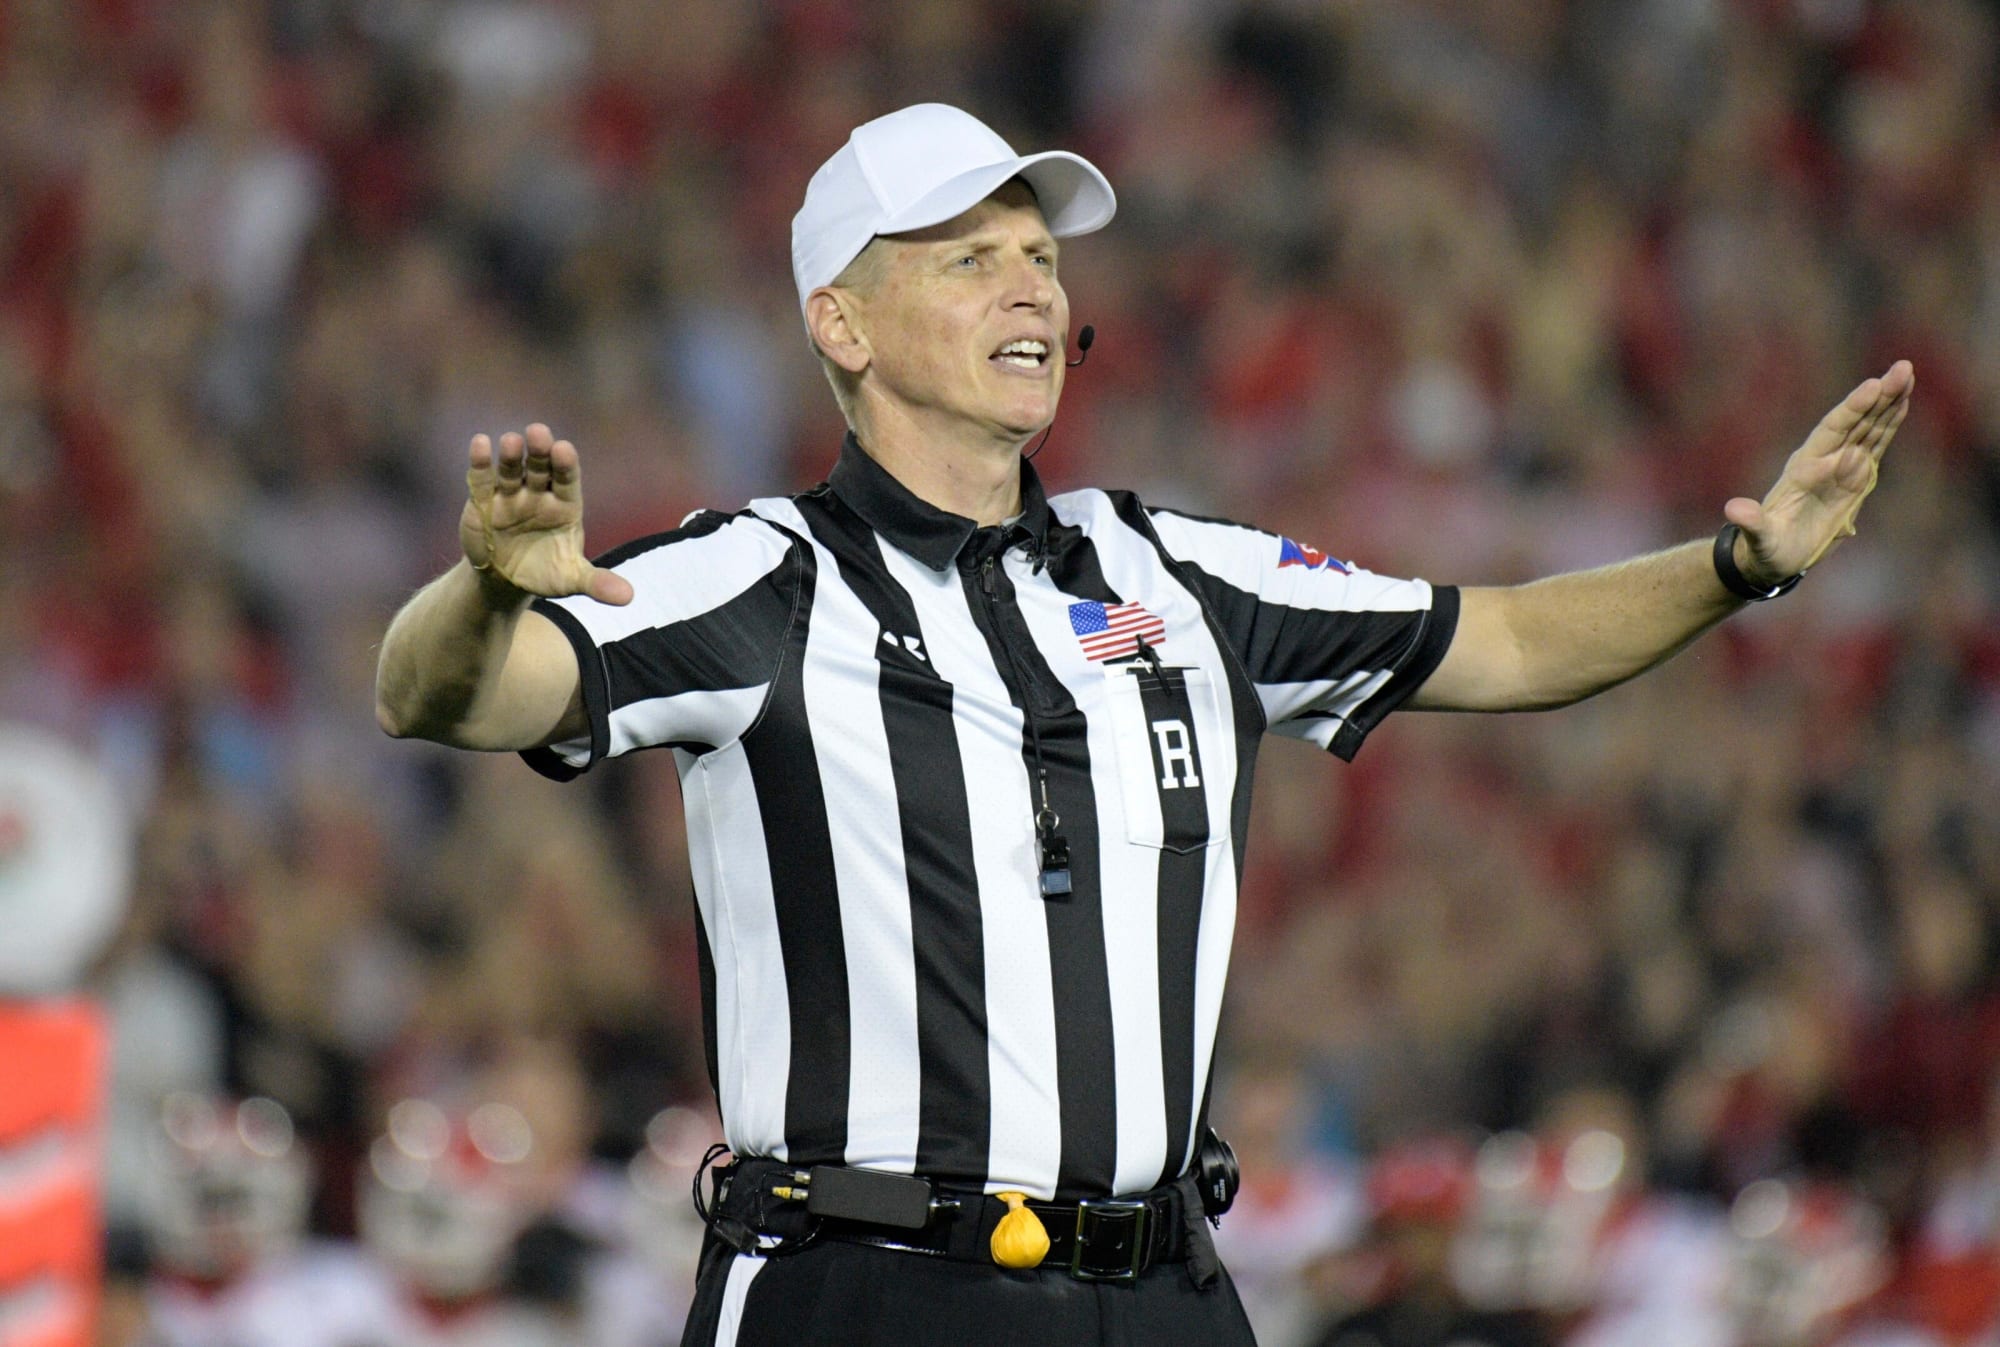 National Championship Game referees Officiating crew for vs TCU